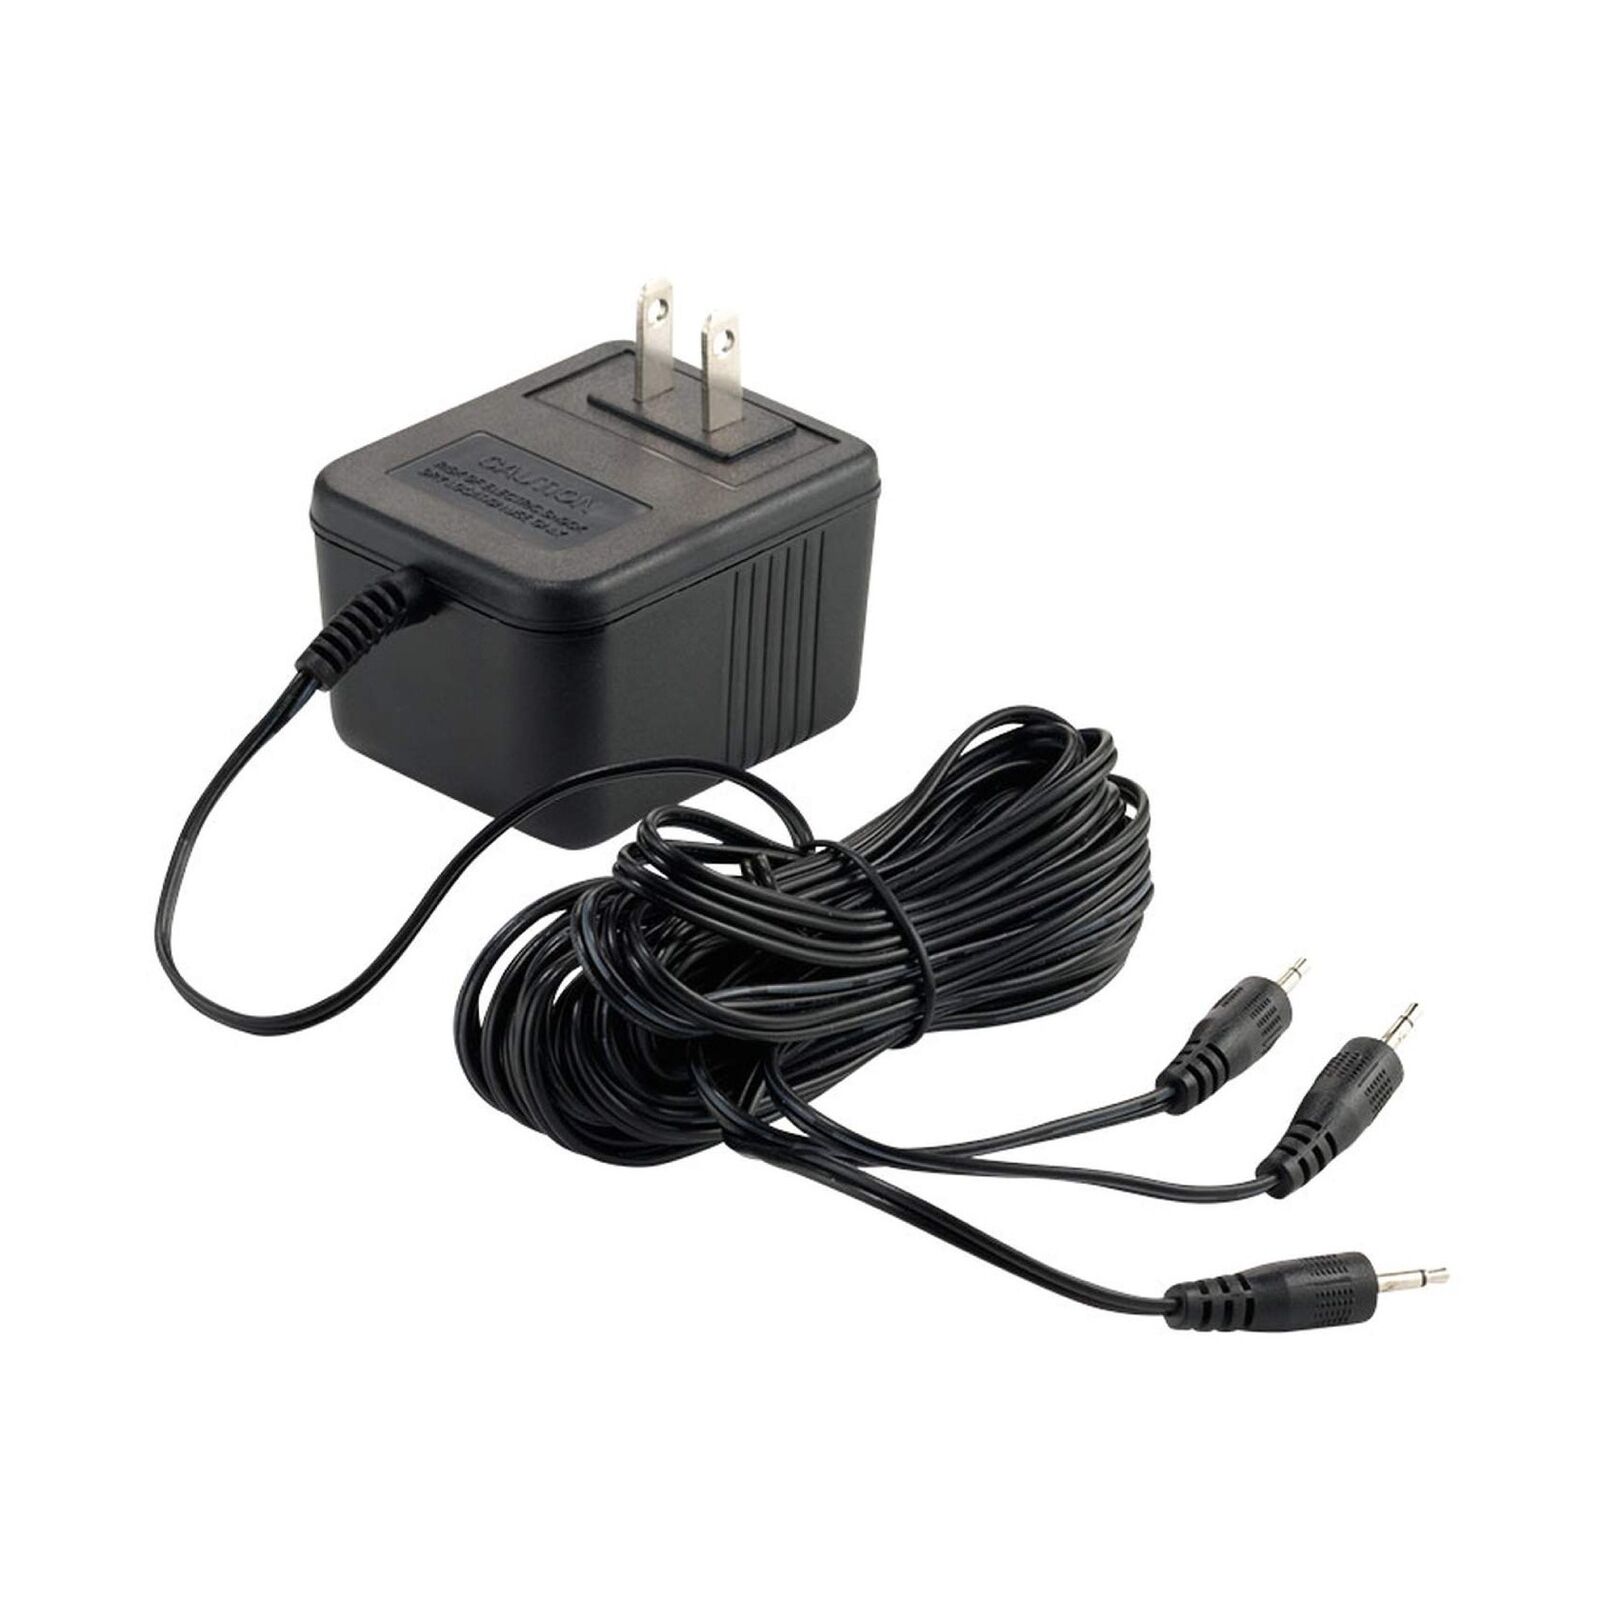 Department 56 Accessories for Village Collections AC/DC Power Adapter, 3.15 I. Brand Does not apply MPN 4035316 UPC 045